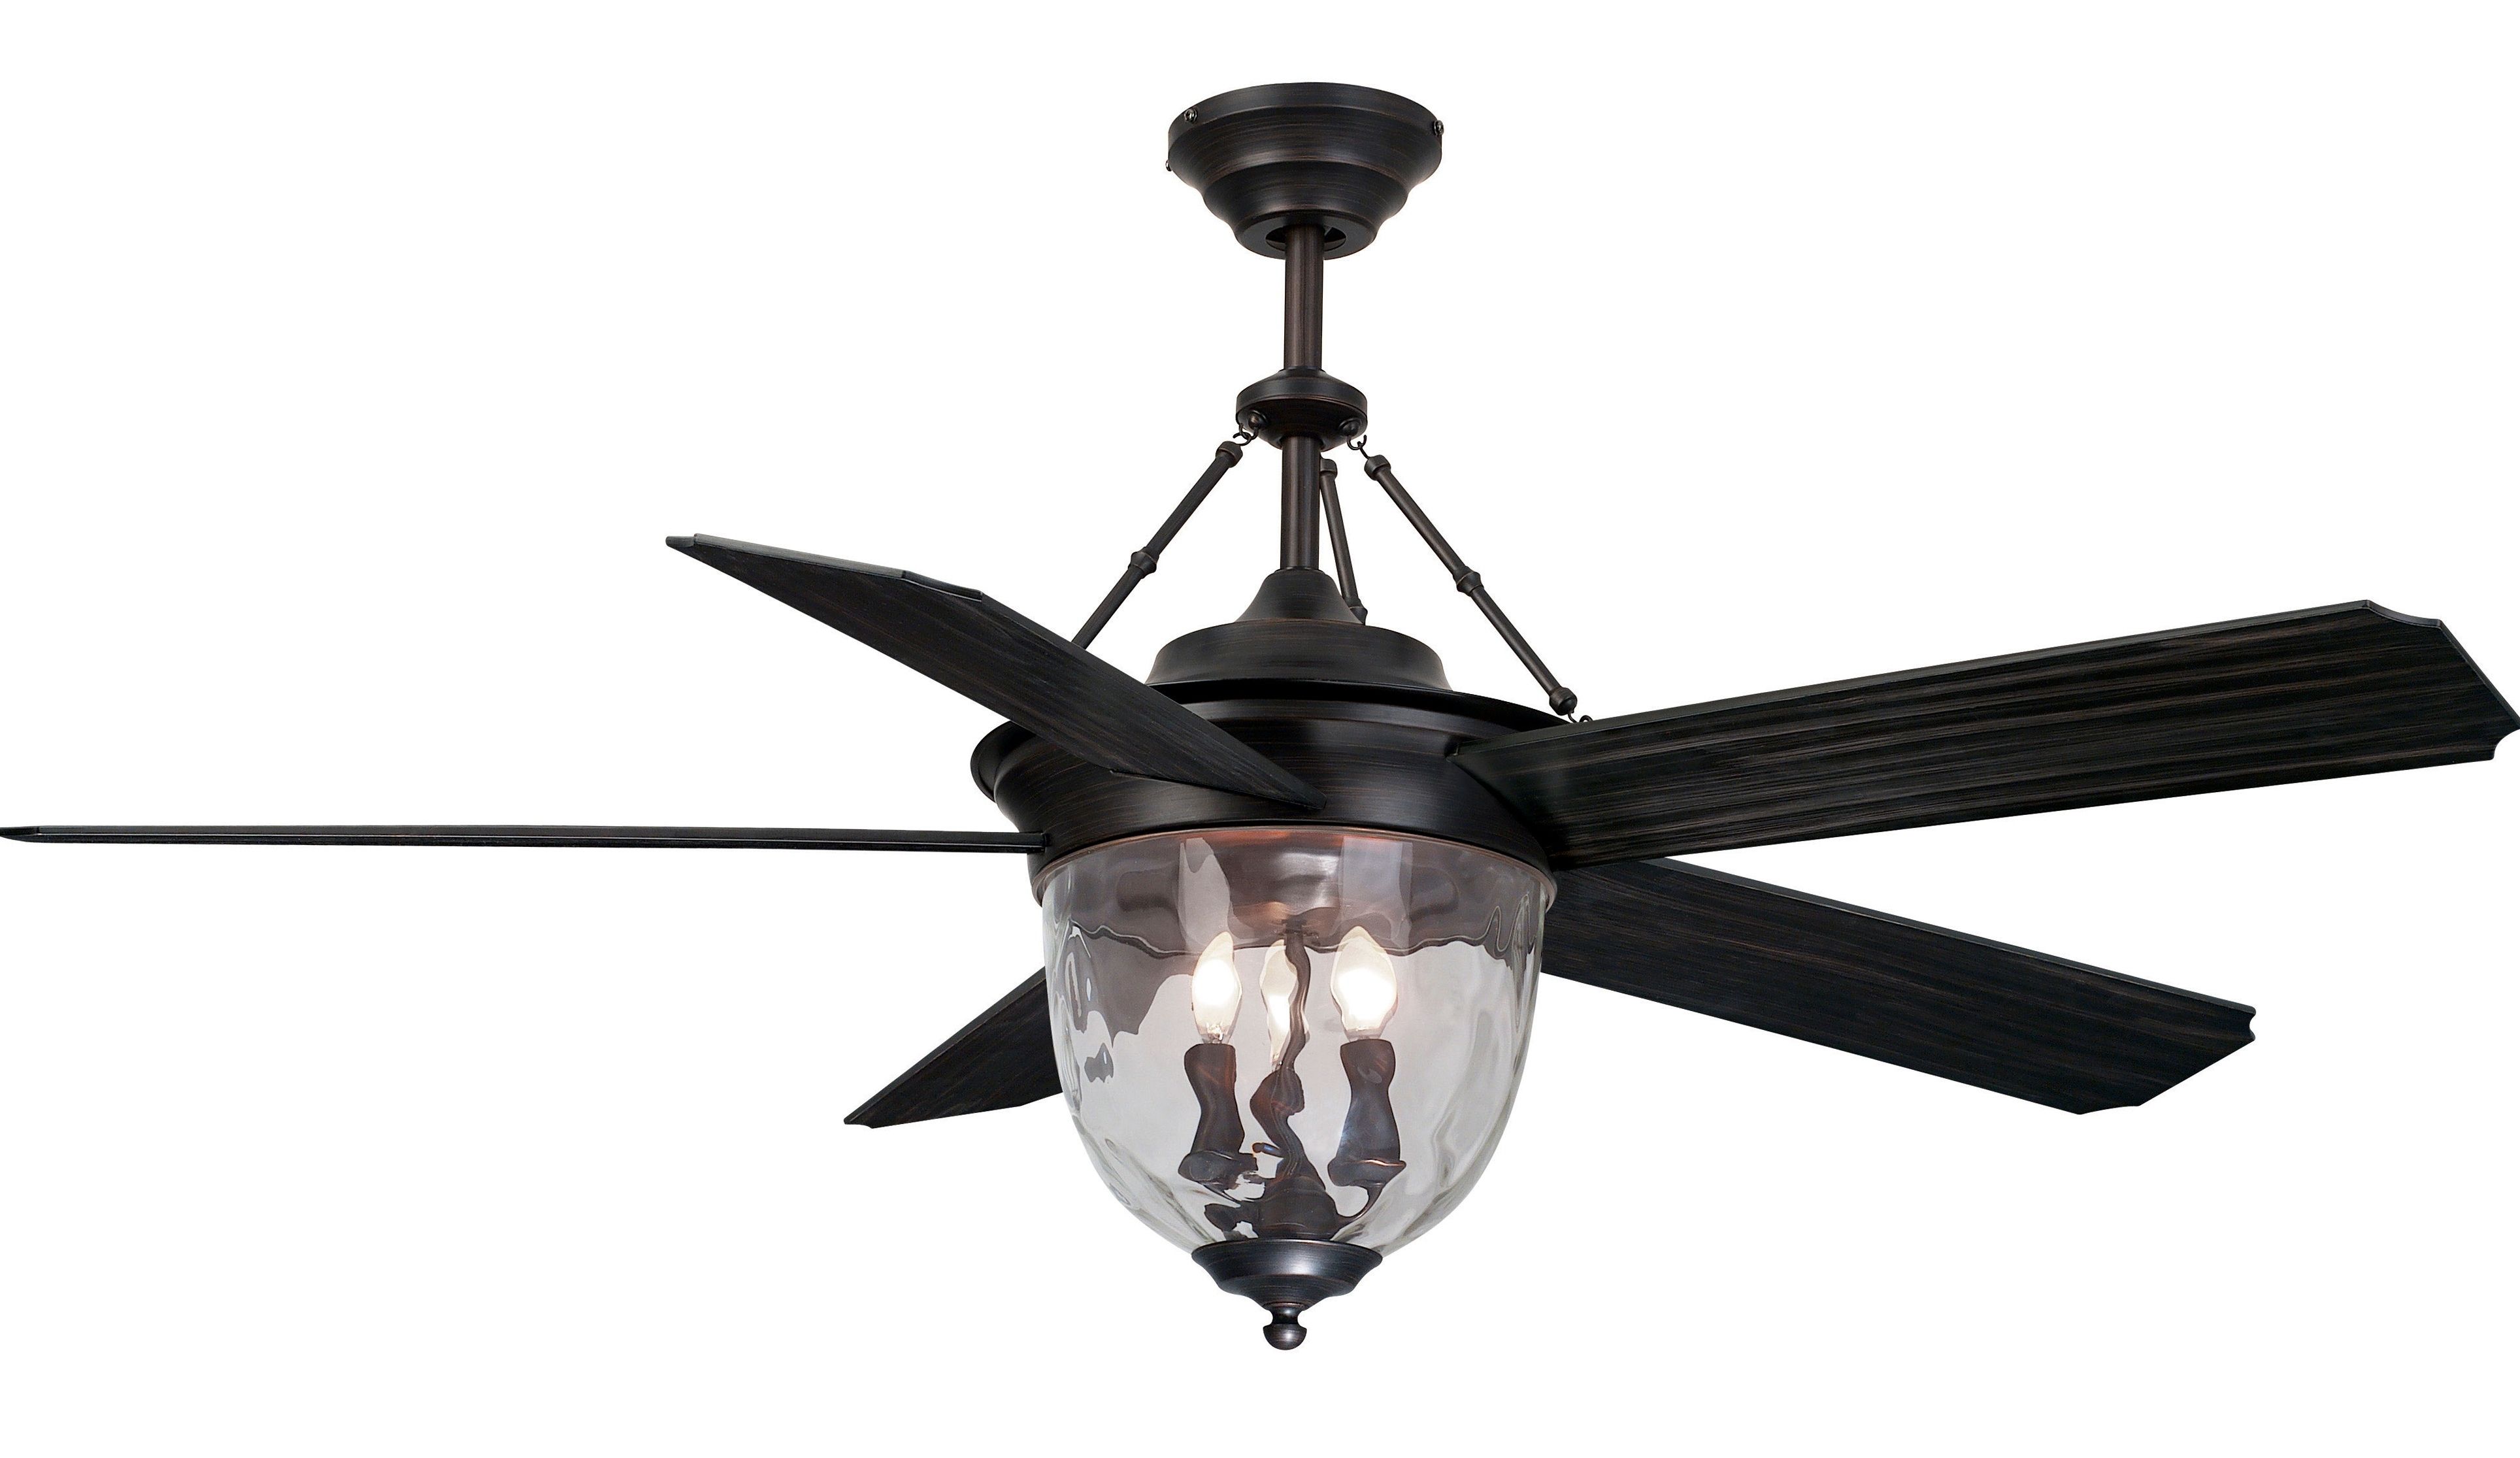 Ceiling: Astounding Lowes Outdoor Ceiling Fans Kichler Outdoor Intended For Latest Elegant Outdoor Ceiling Fans (View 9 of 20)